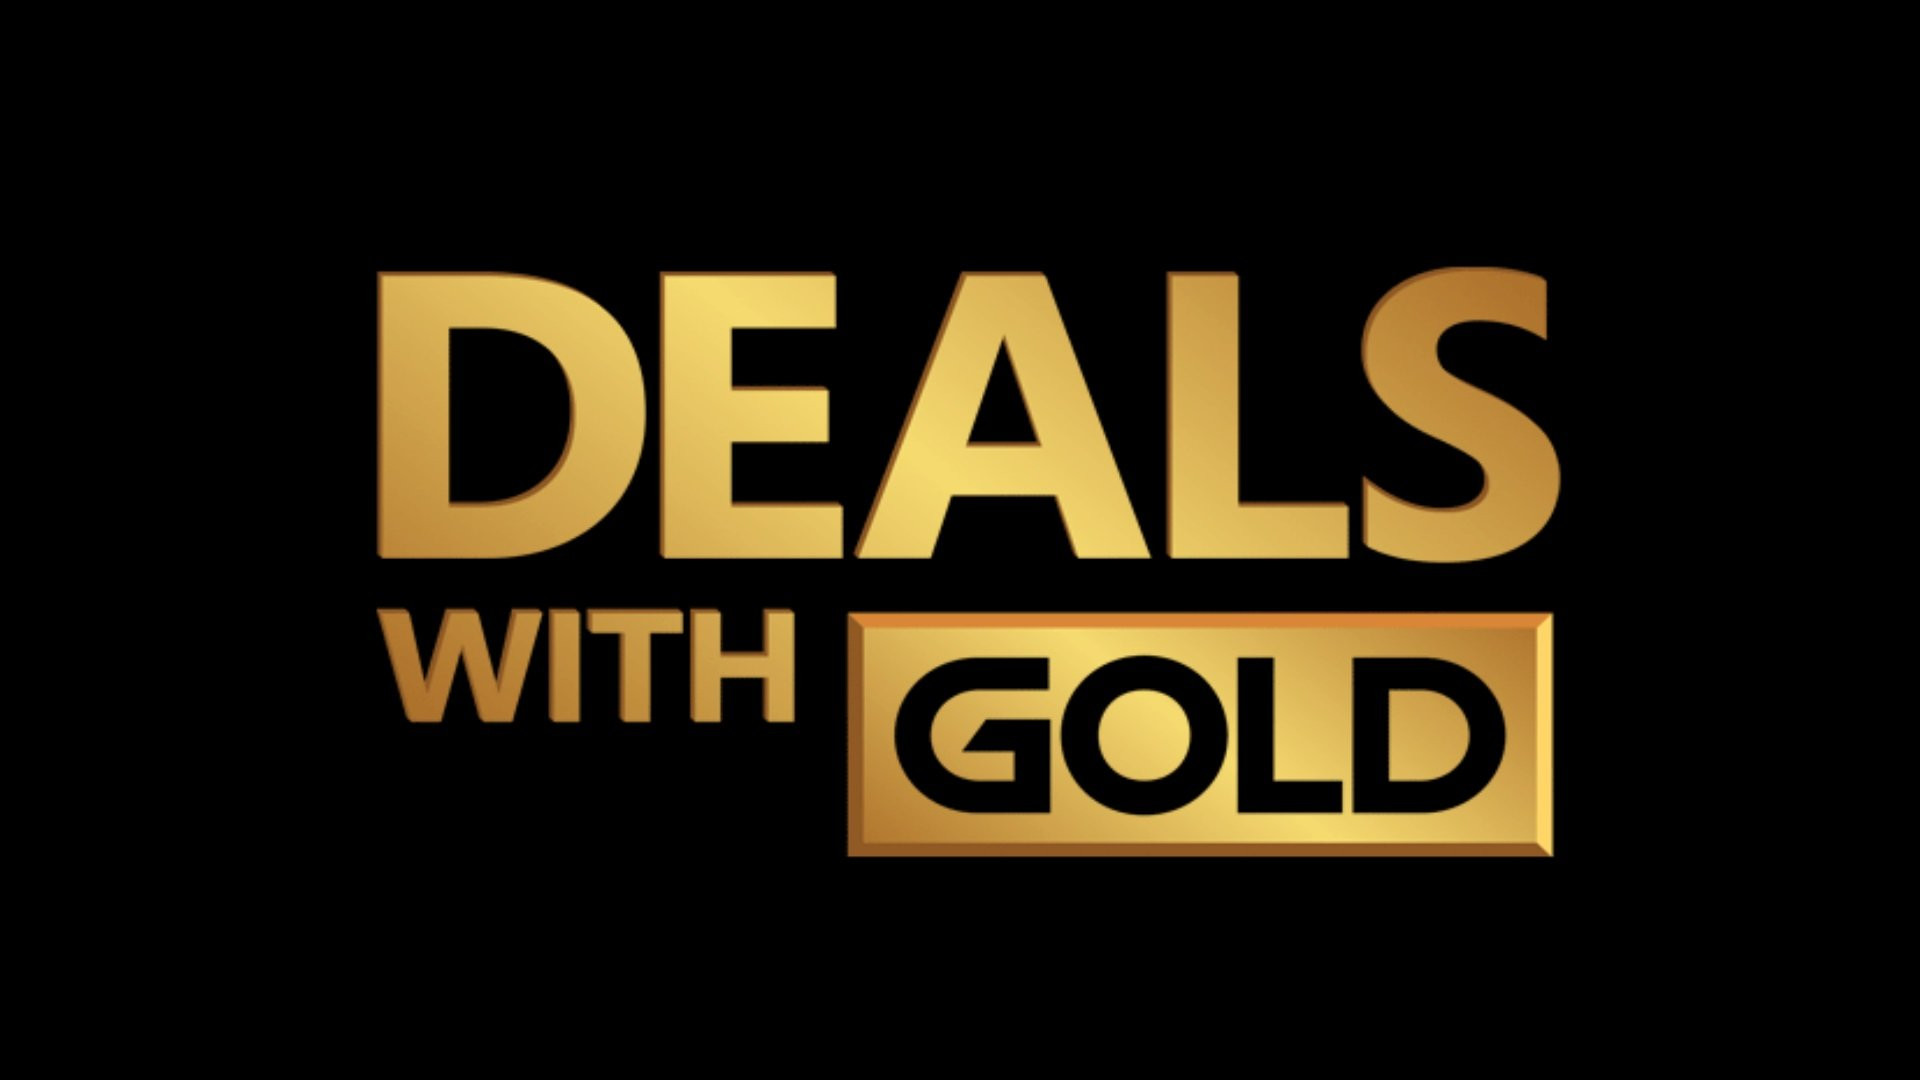 Deals with Gold semaine 51